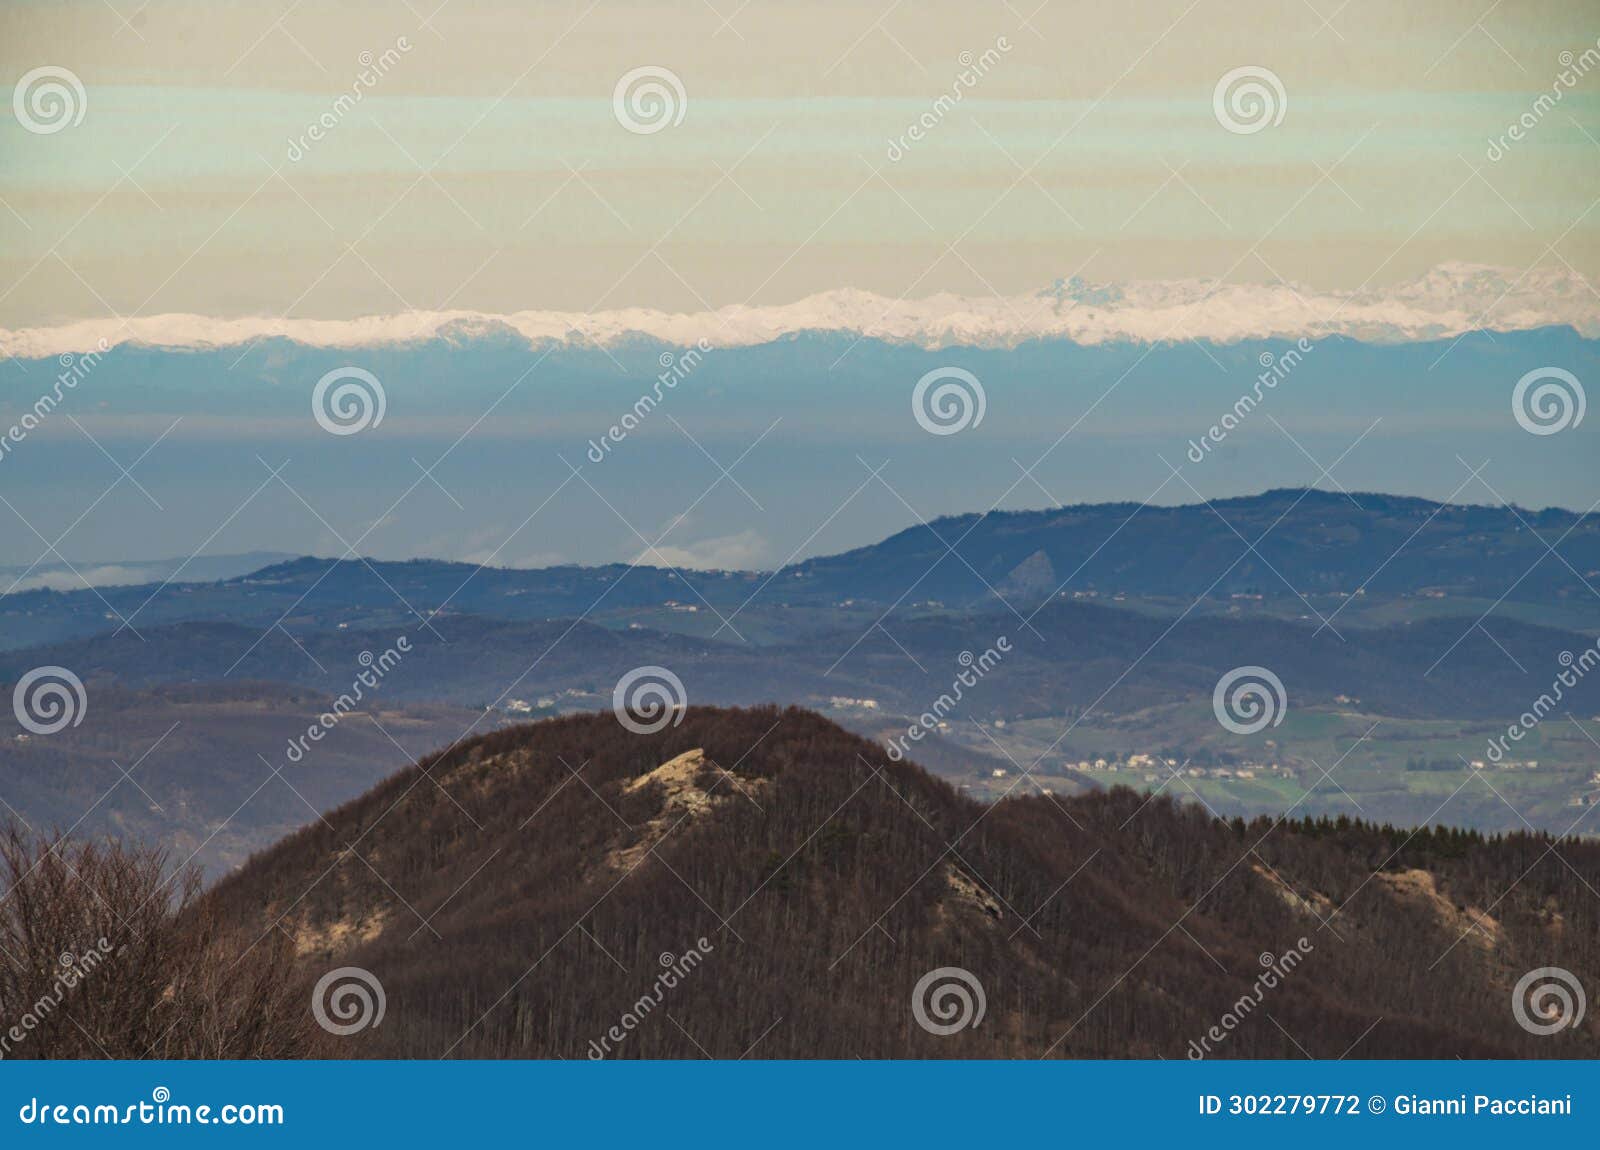 view of the panaro valley in winter with a view to the horizon of the alps